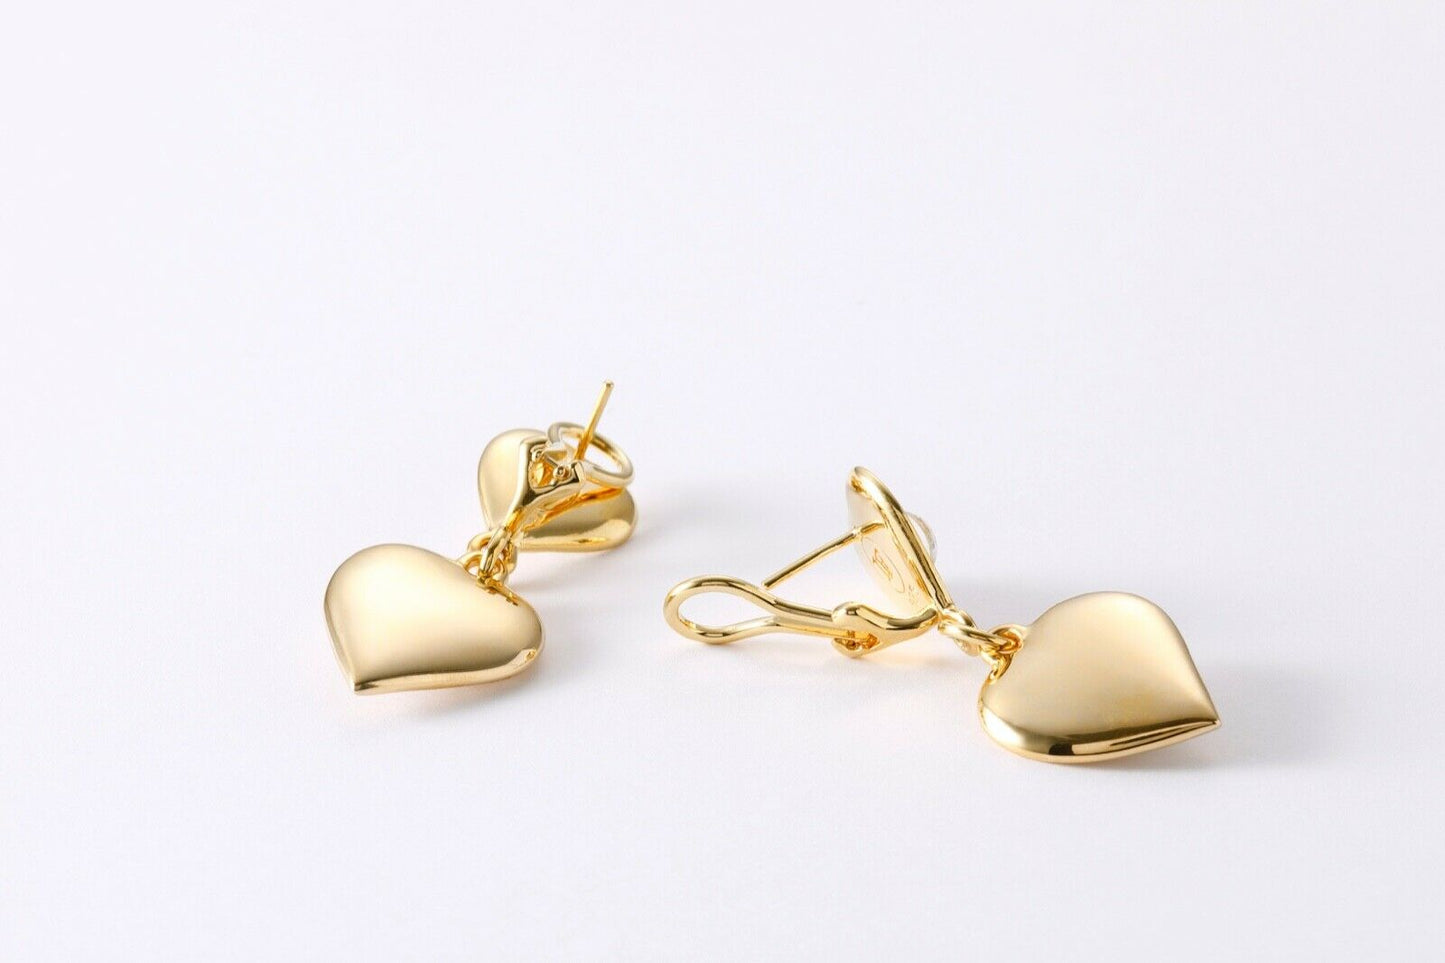 New Heart Dangle Earrings Cabochon 24K Gold Plated Sterling Silver 925 Gorgeous Swarovski Crystal